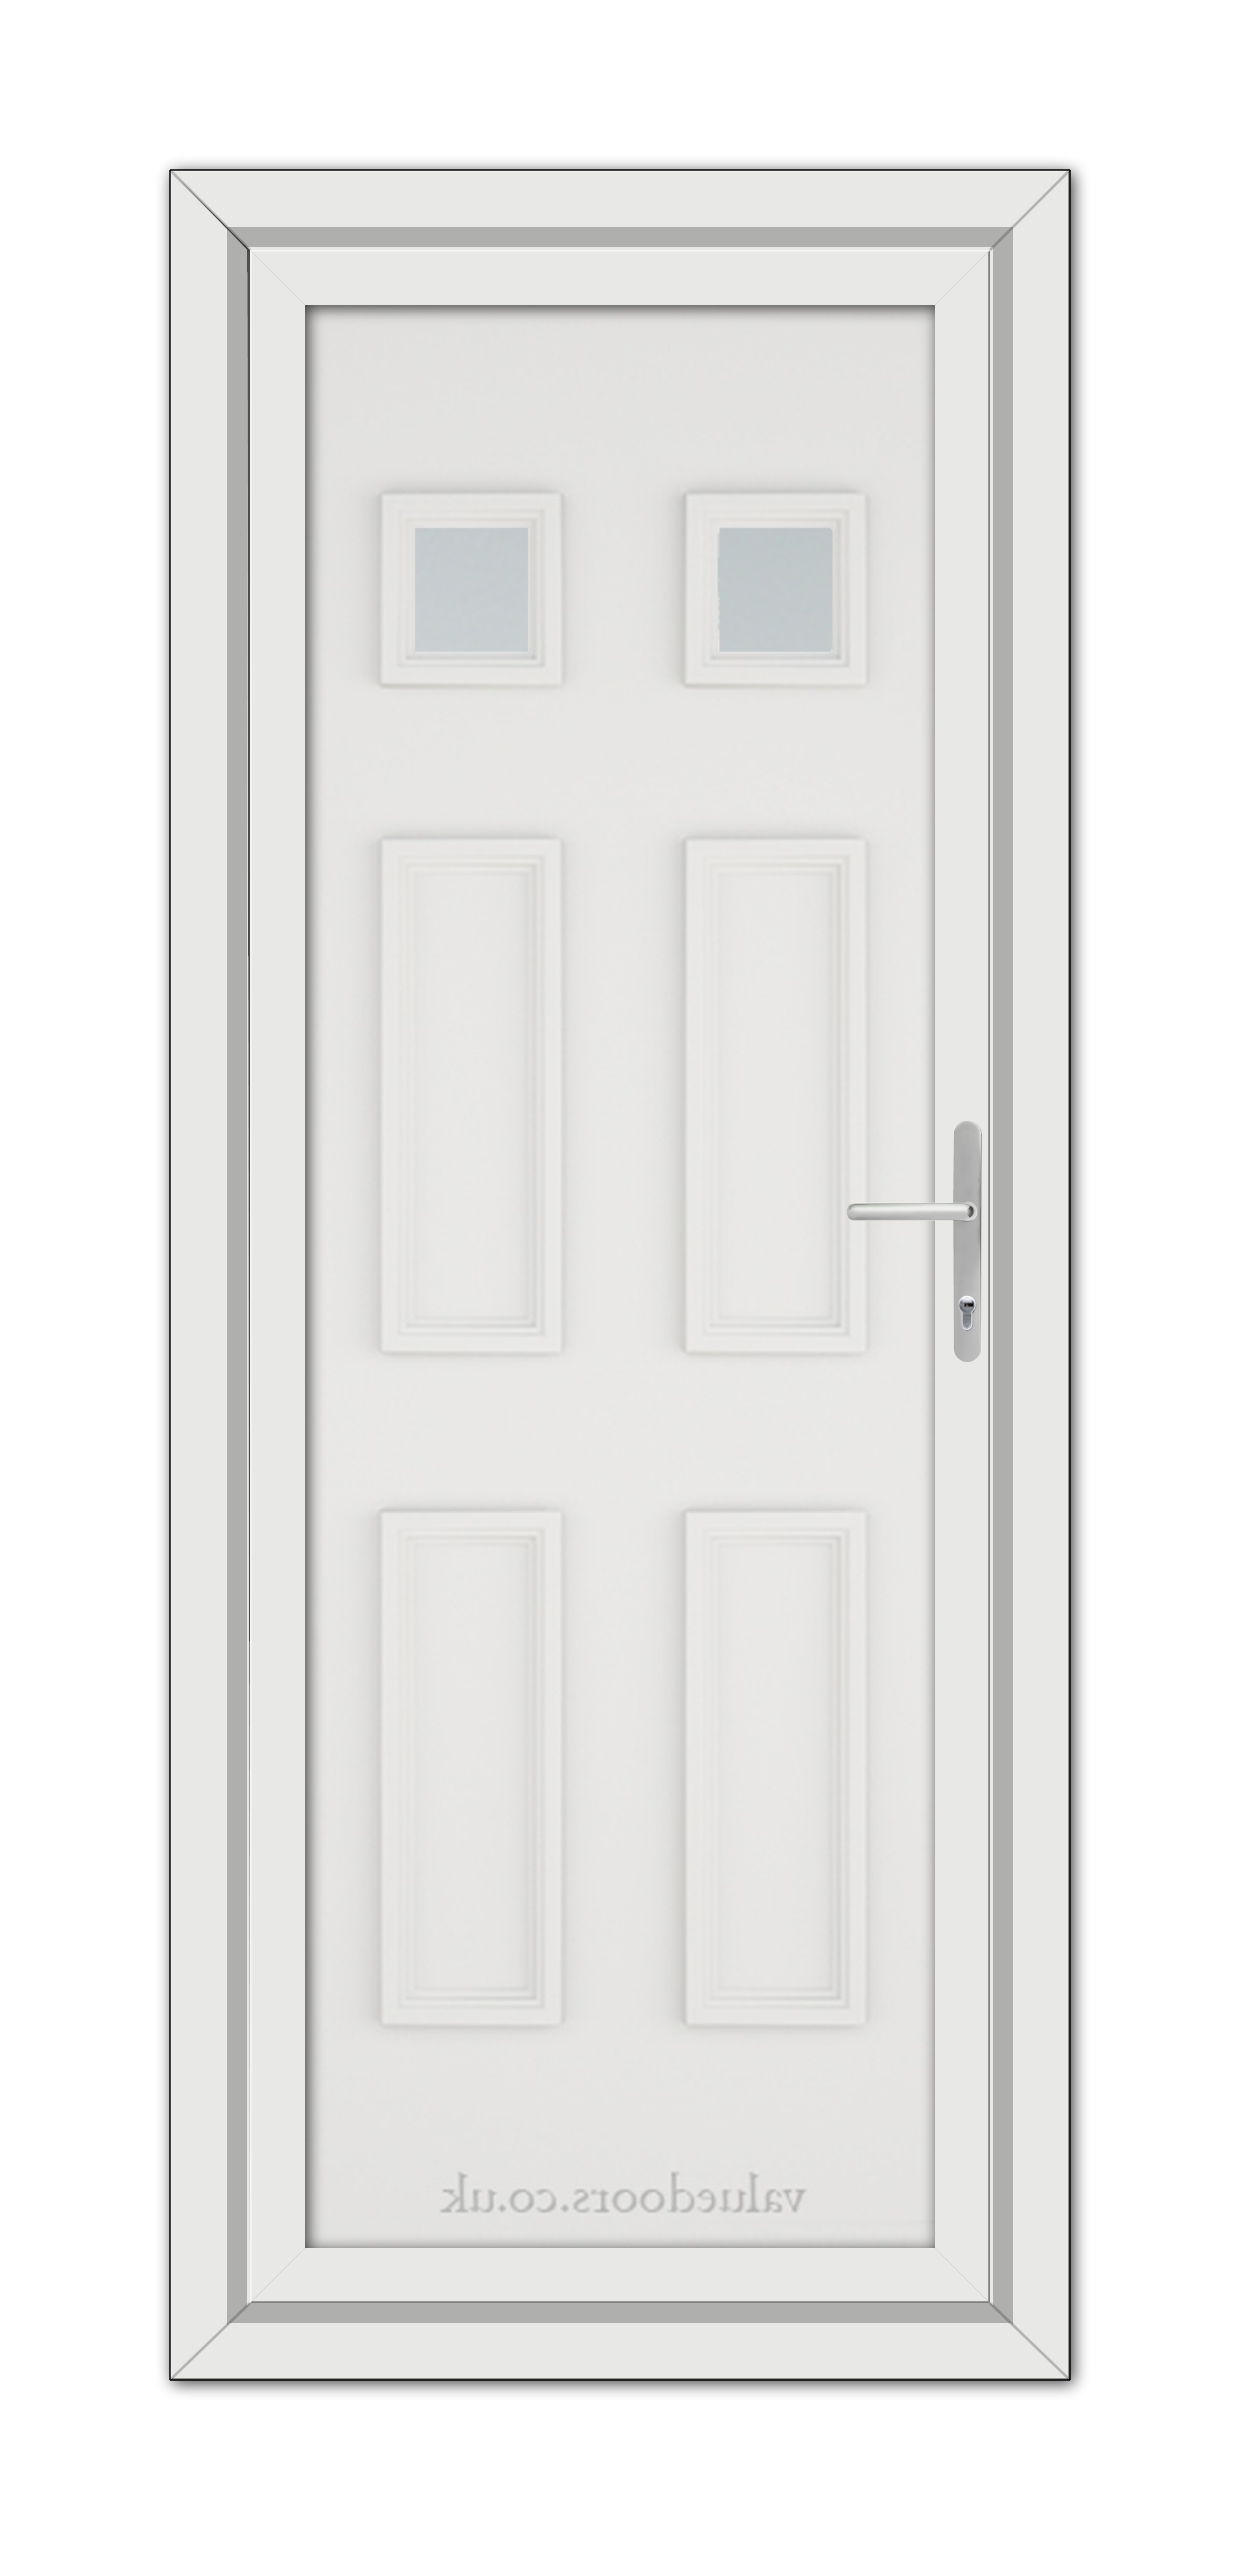 A White Windsor uPVC Door with a metal handle and three small square windows at the top, set within a grey frame.